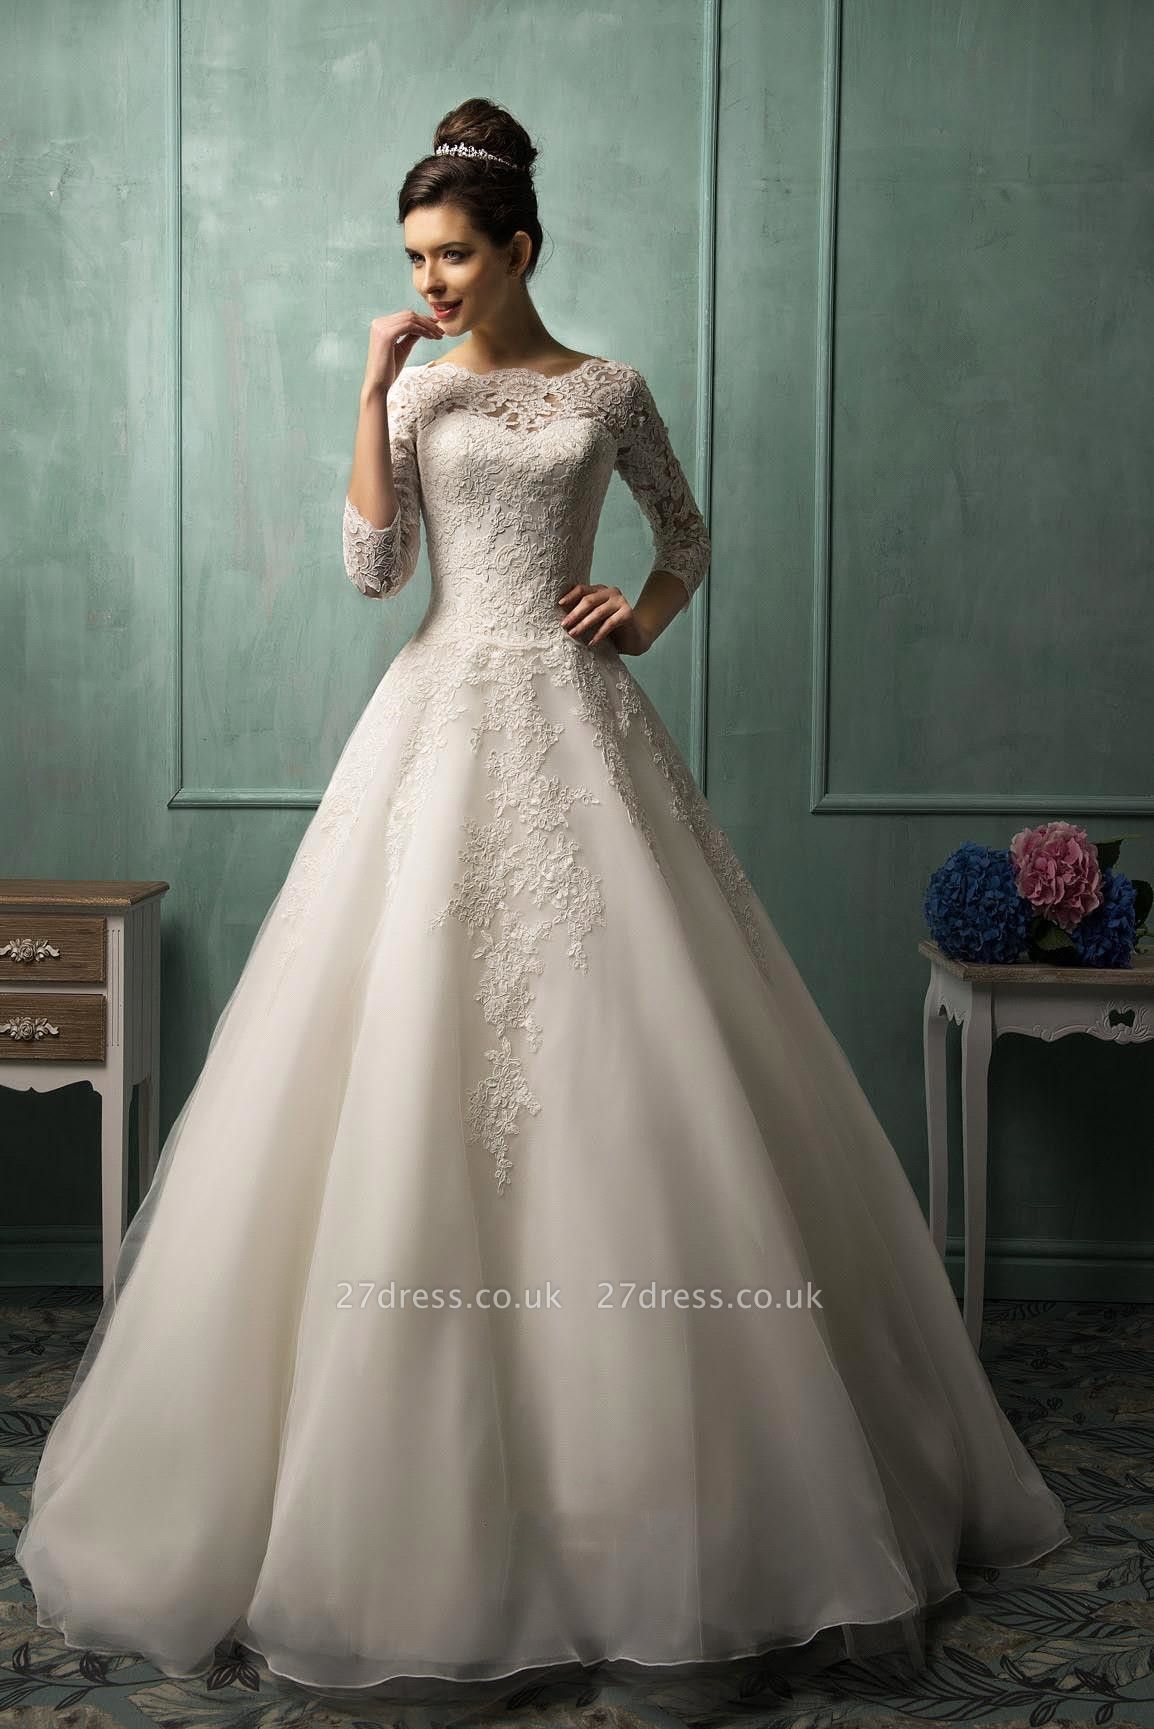 Elegant 3/4 Sleeve Lace Appliques Wedding Dresses UK Bridal Gowns with Bottons